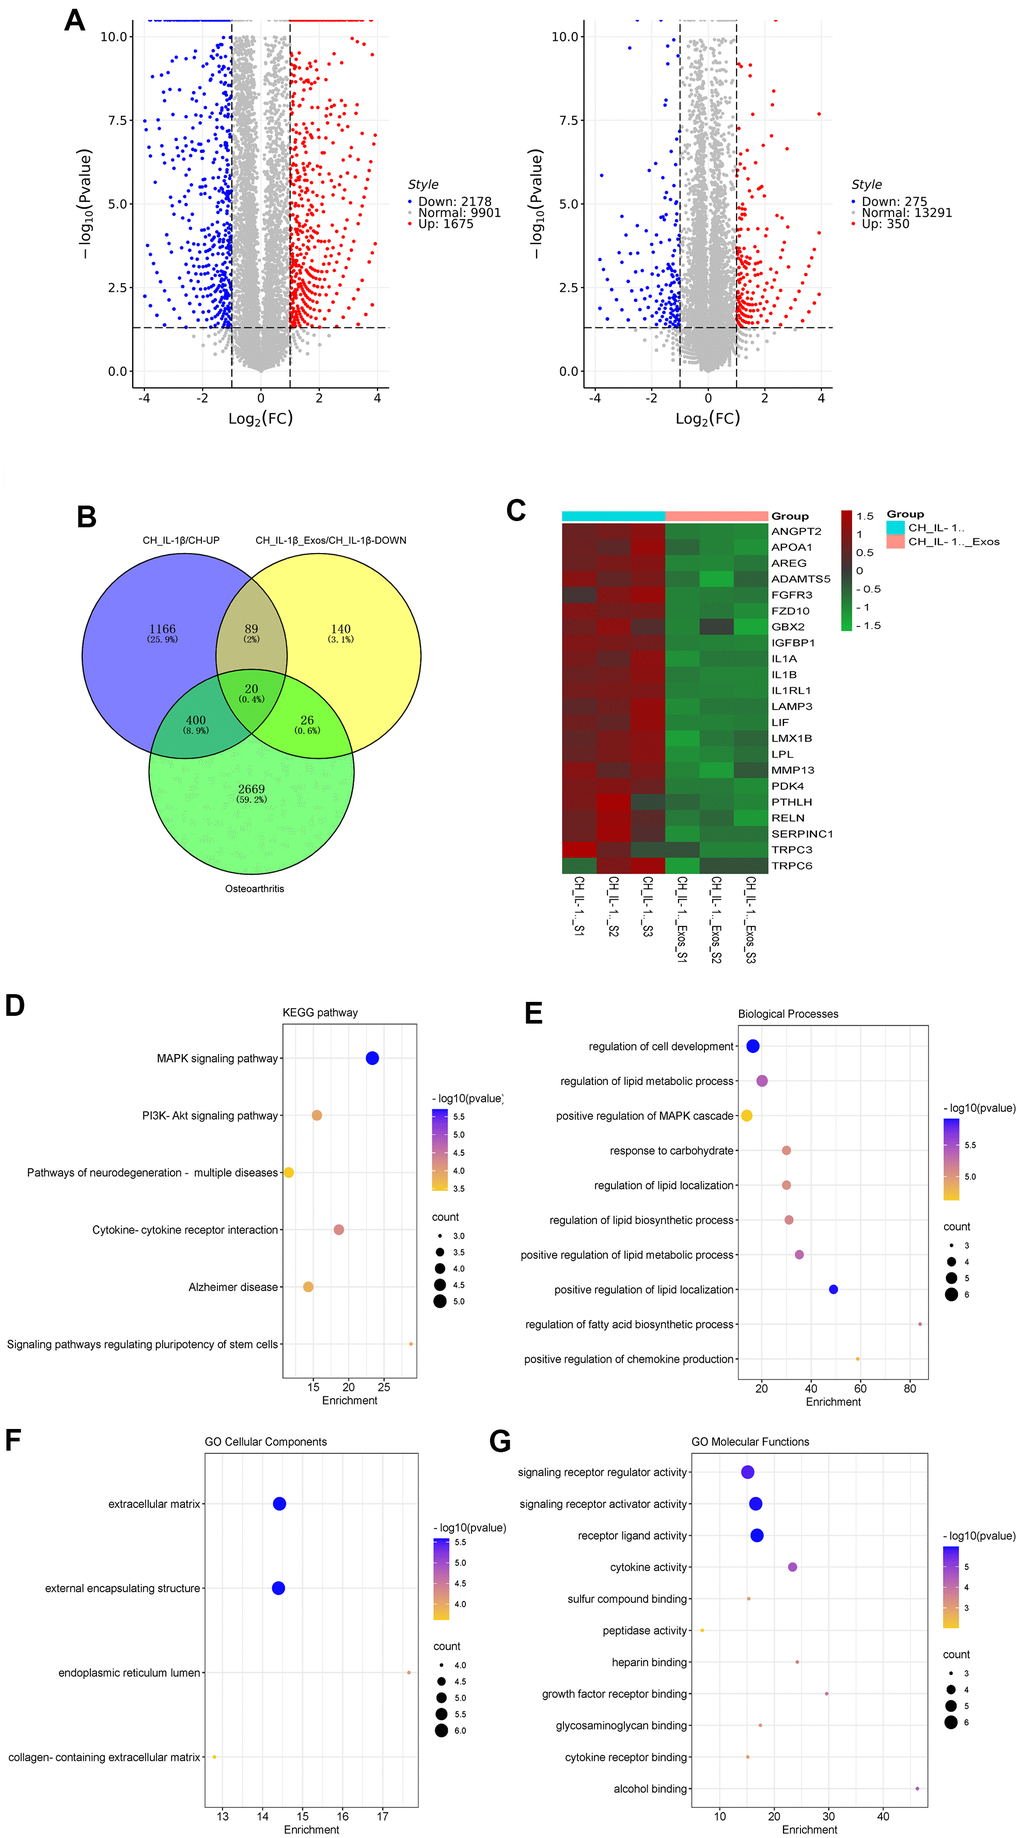 Sequencing and bioinformatic analysis of mRNA in chondrocytes. (A) Volcano plot of genes differentially expressed by sequencing of chondrocytes from different groups. (B) Venn diagram of 1675 genes up-regulated in chondrocytes treated with IL-1β relative to normal chondrocyte, 275 genes downregulated in chondrocytes treated with IL-1β and hUC-MSCs-Exos relative to chondrocytes treated with IL-1β, and 3095 genes related to osteoarthritis in GeneCards database. (C) Heatmap of the screened 20 differentially expressed genes. (D–G) KEGG and GO (GO biological process, GO cellular component and GO molecular function) analysis of the screened 20 differentially expressed genes. The color of bars indicates p values, and p